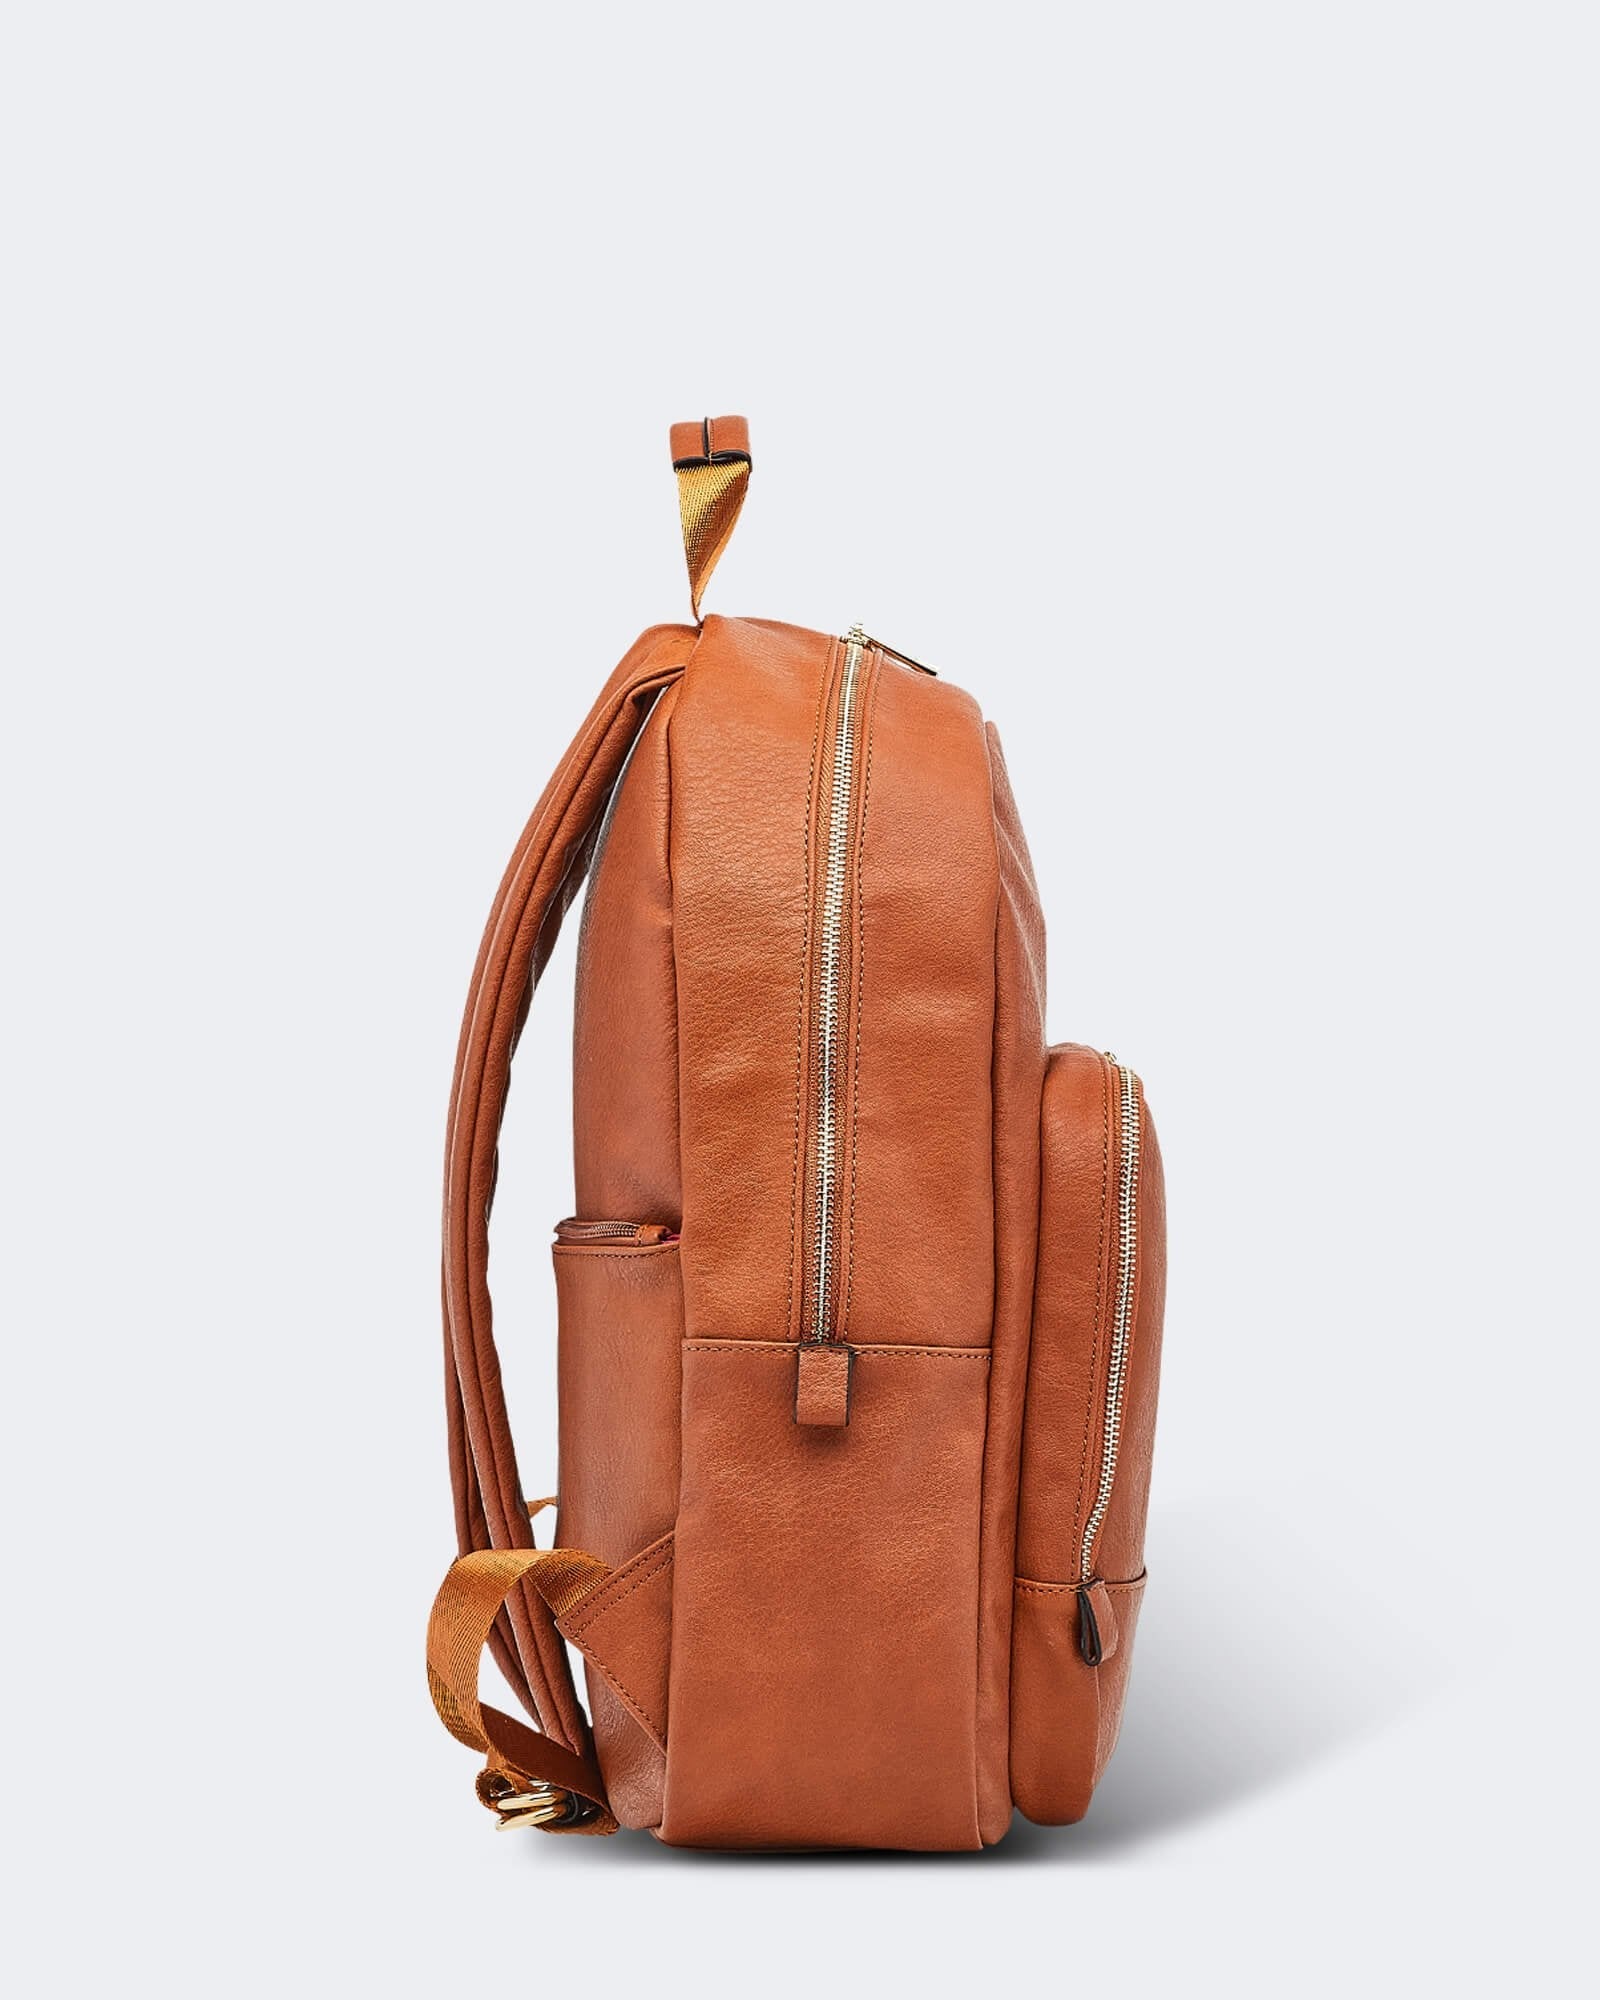 Louenhide Huxley Backpack - Tan Accessories - Other Accessories - Handbags & Wallets by Louenhide | Grace the Boutique